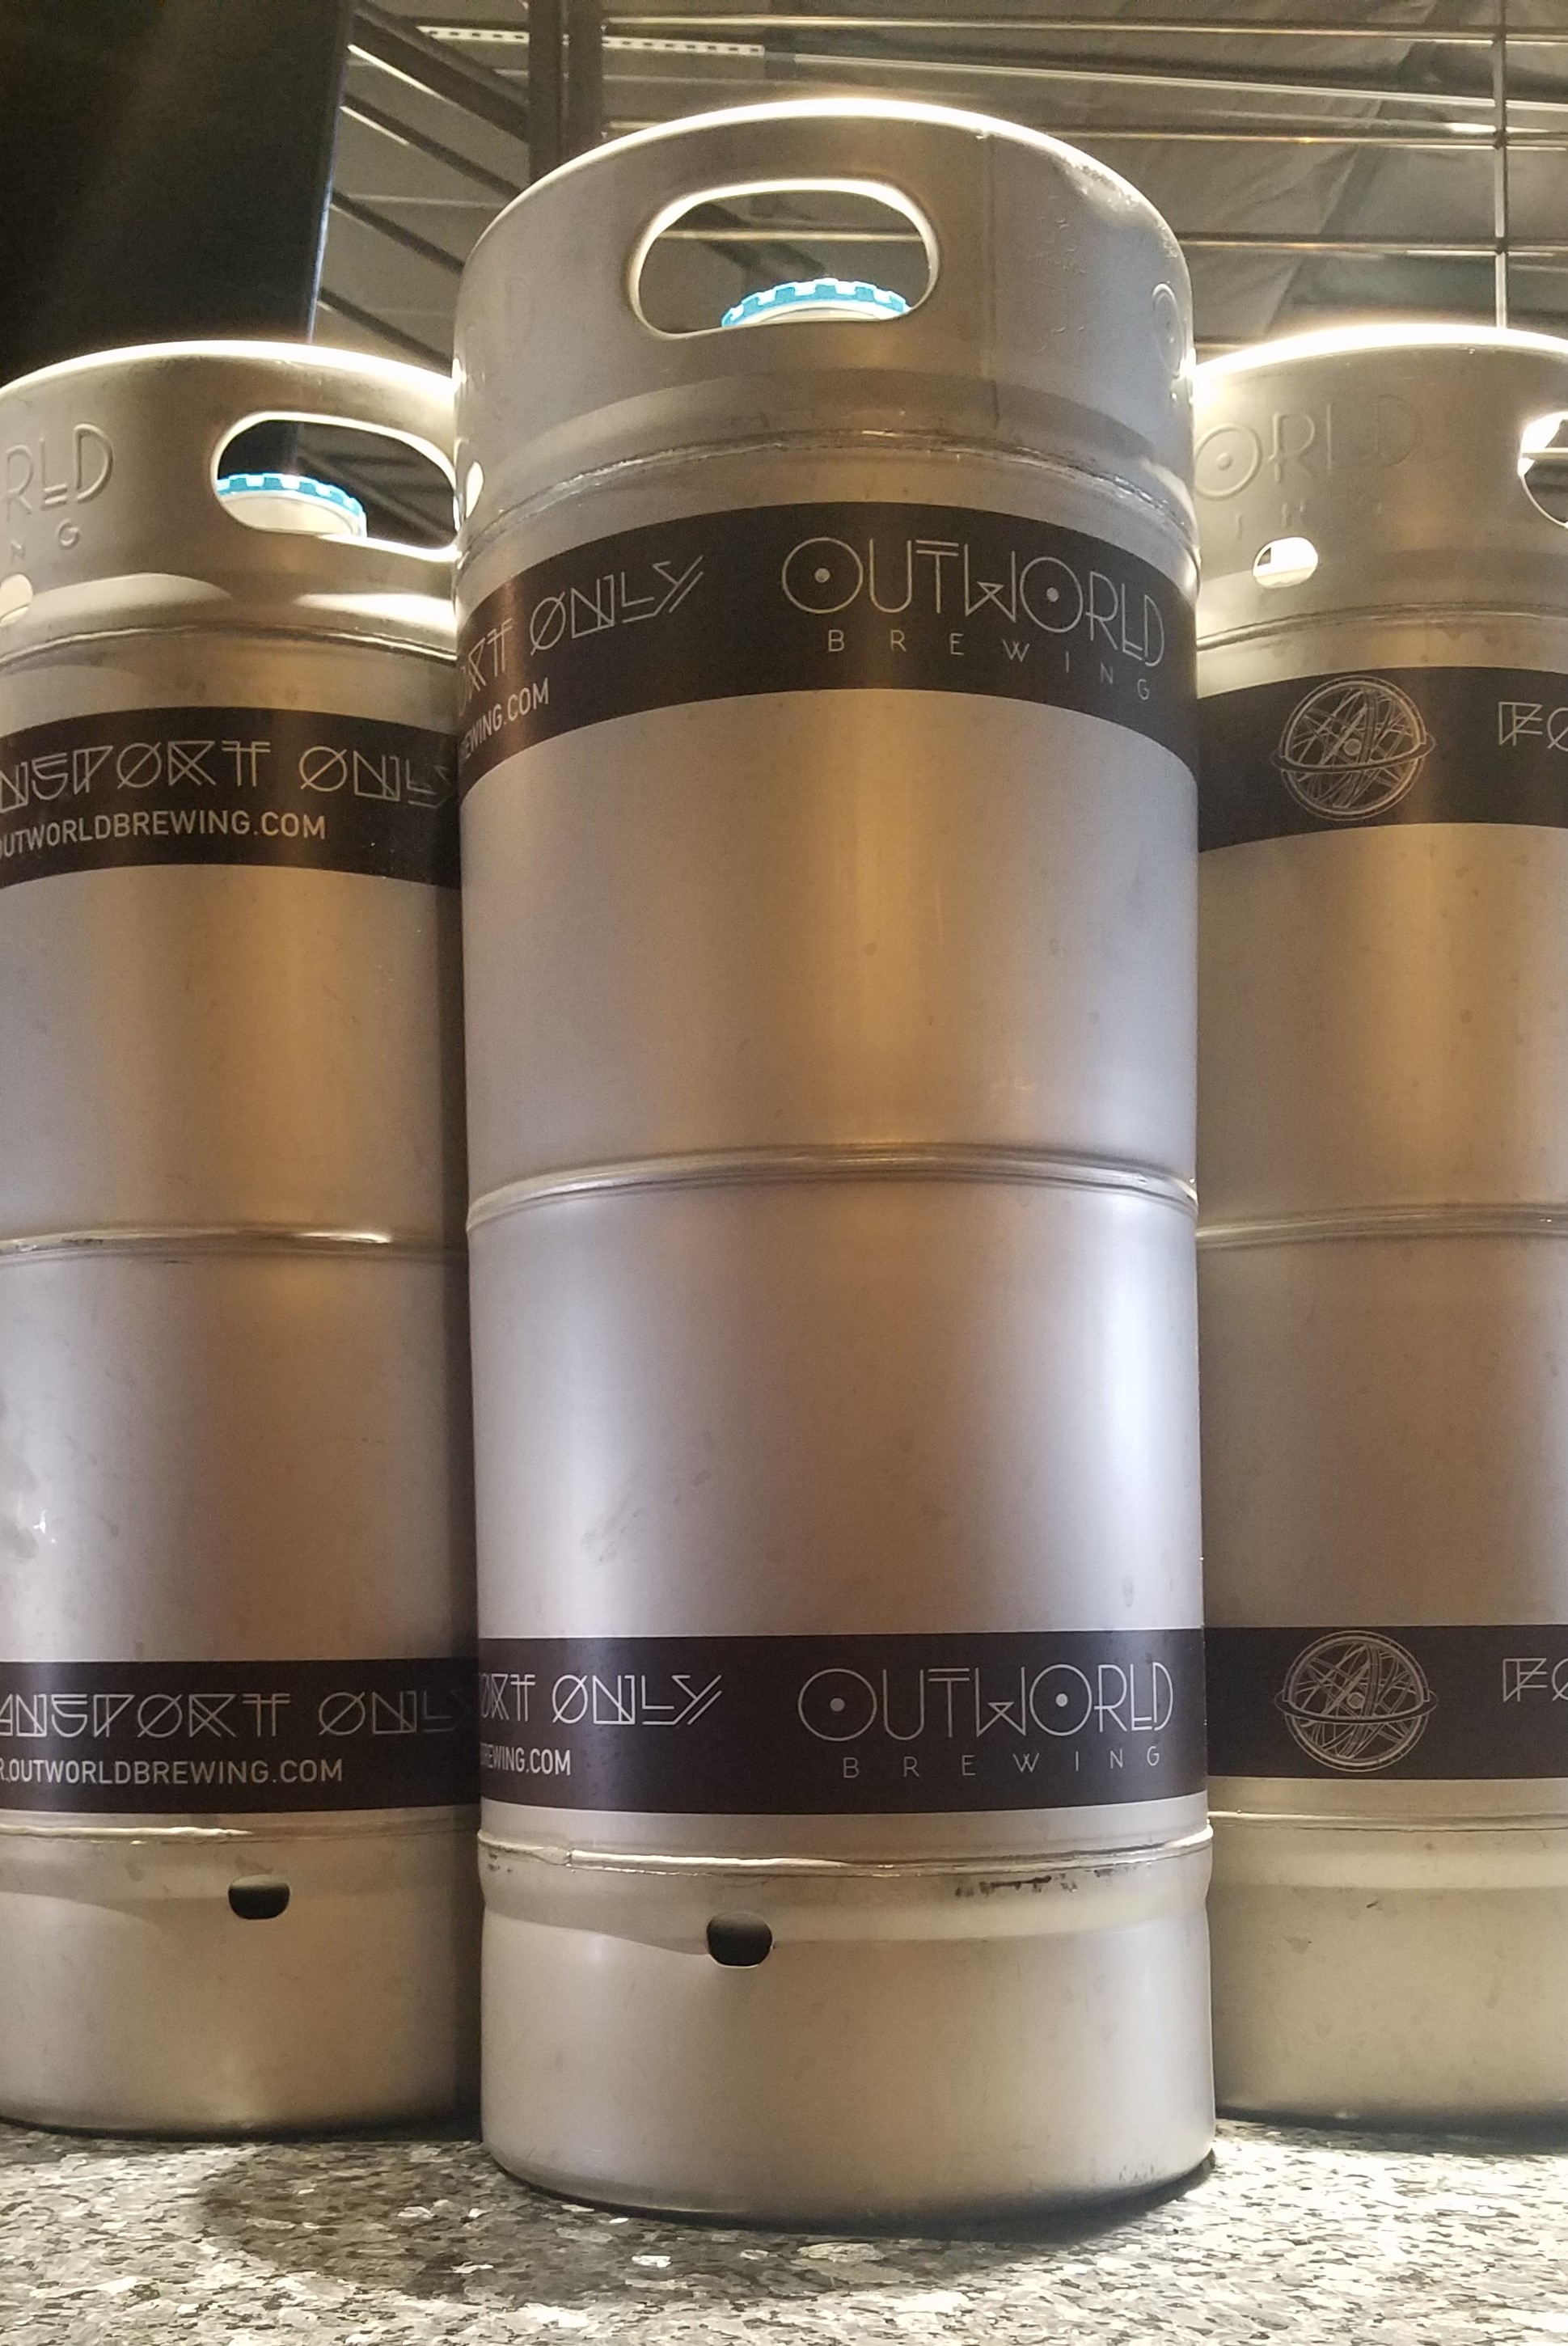 Upward shot of three silver sixtel kegs with a purple band that says 